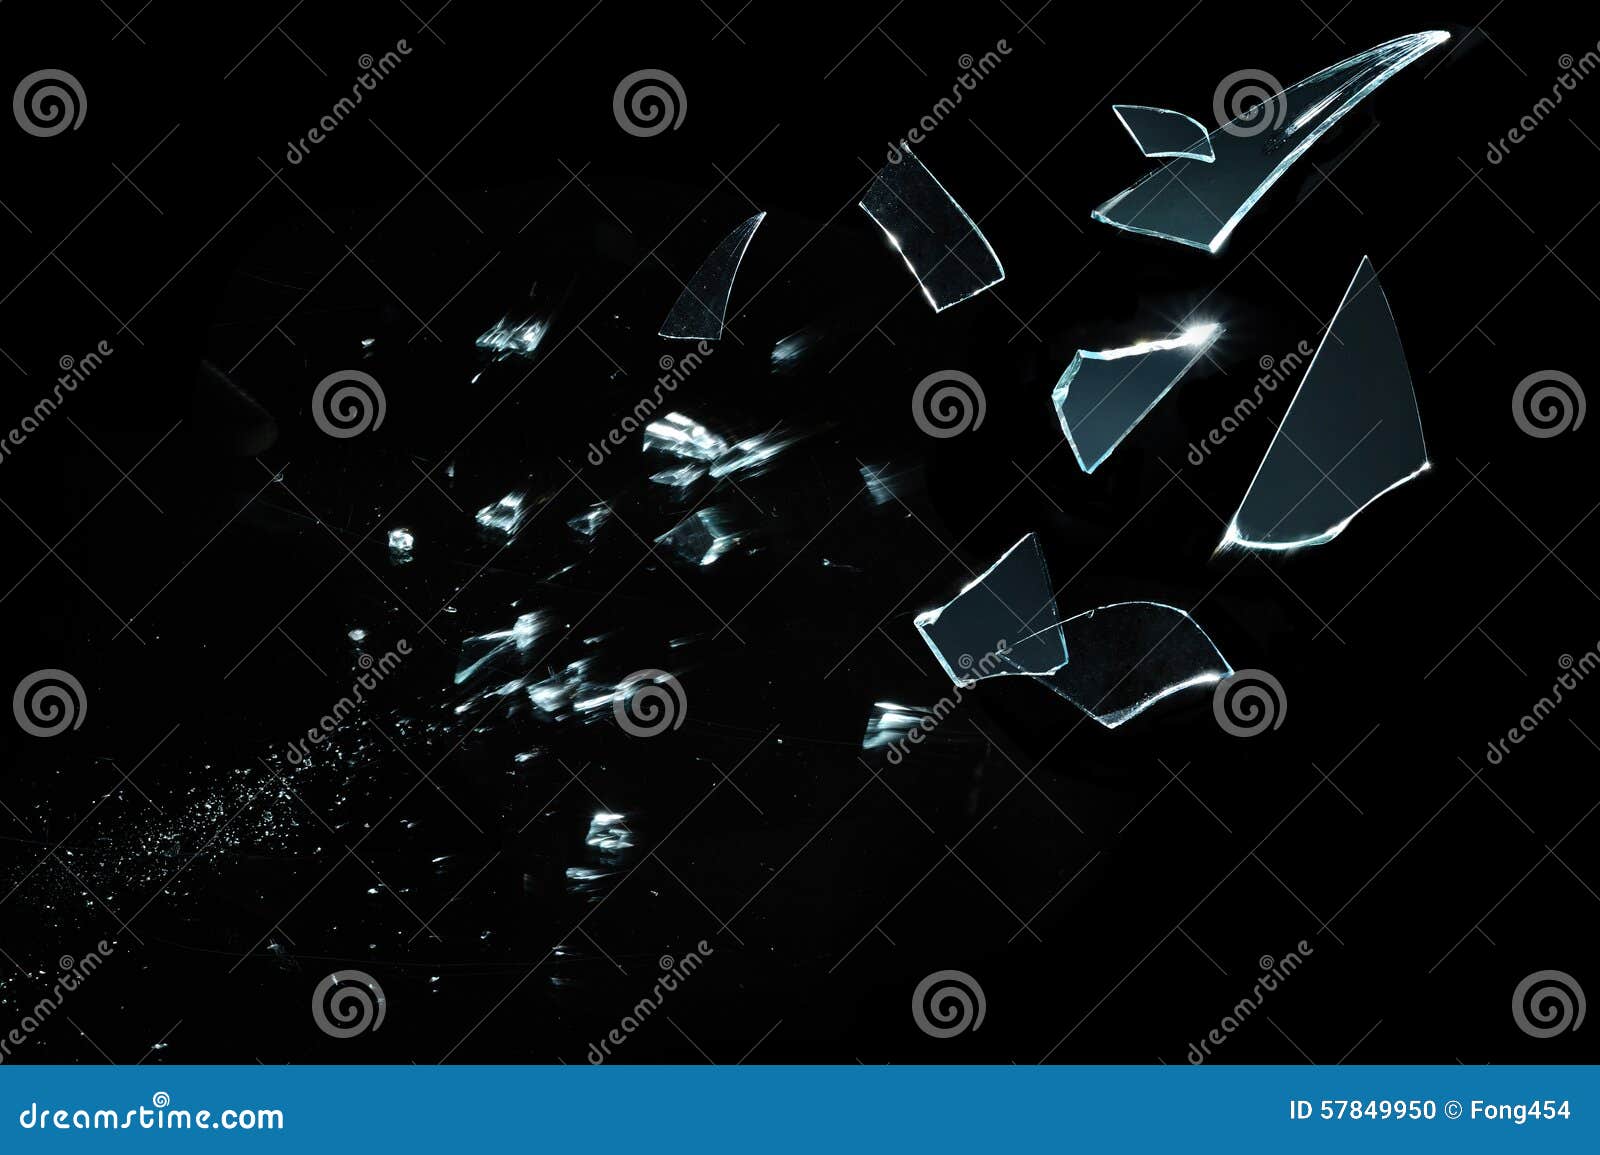 https://thumbs.dreamstime.com/z/shattered-splitted-glass-pieces-isolated-black-sharp-flying-to-right-side-photo-take-57849950.jpg